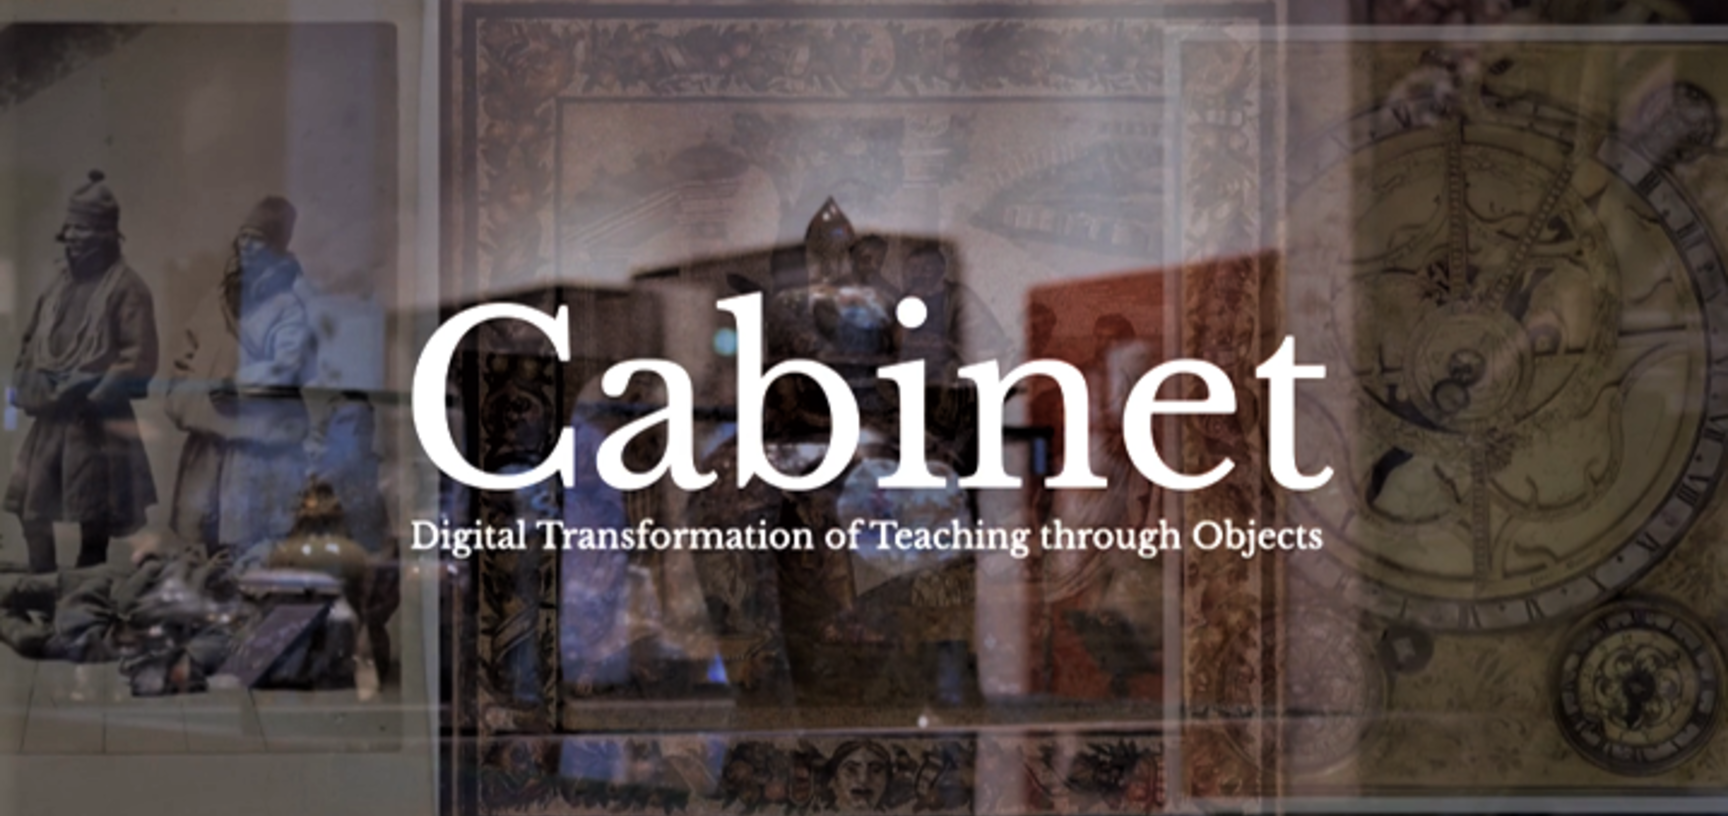 Banner image with background of paintings and objects reading 'Cabinet: Digital Transformation of Teaching through Objects'